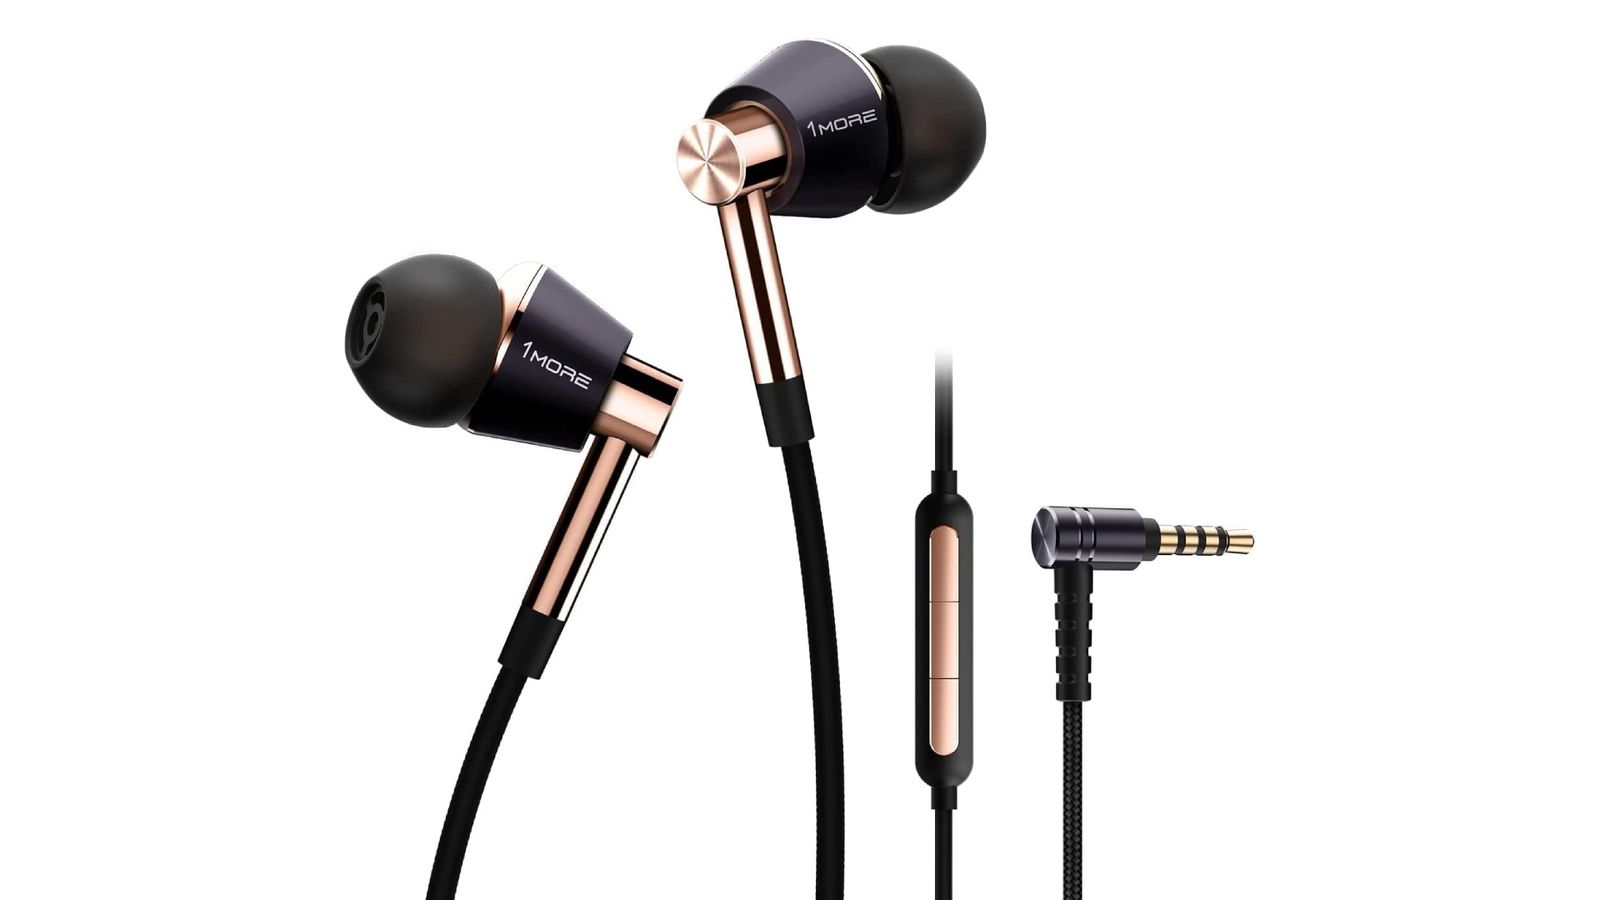 Best wired earbuds - 1more Triple Driver product image of a set of black and gold wired earbuds with onboard controls.